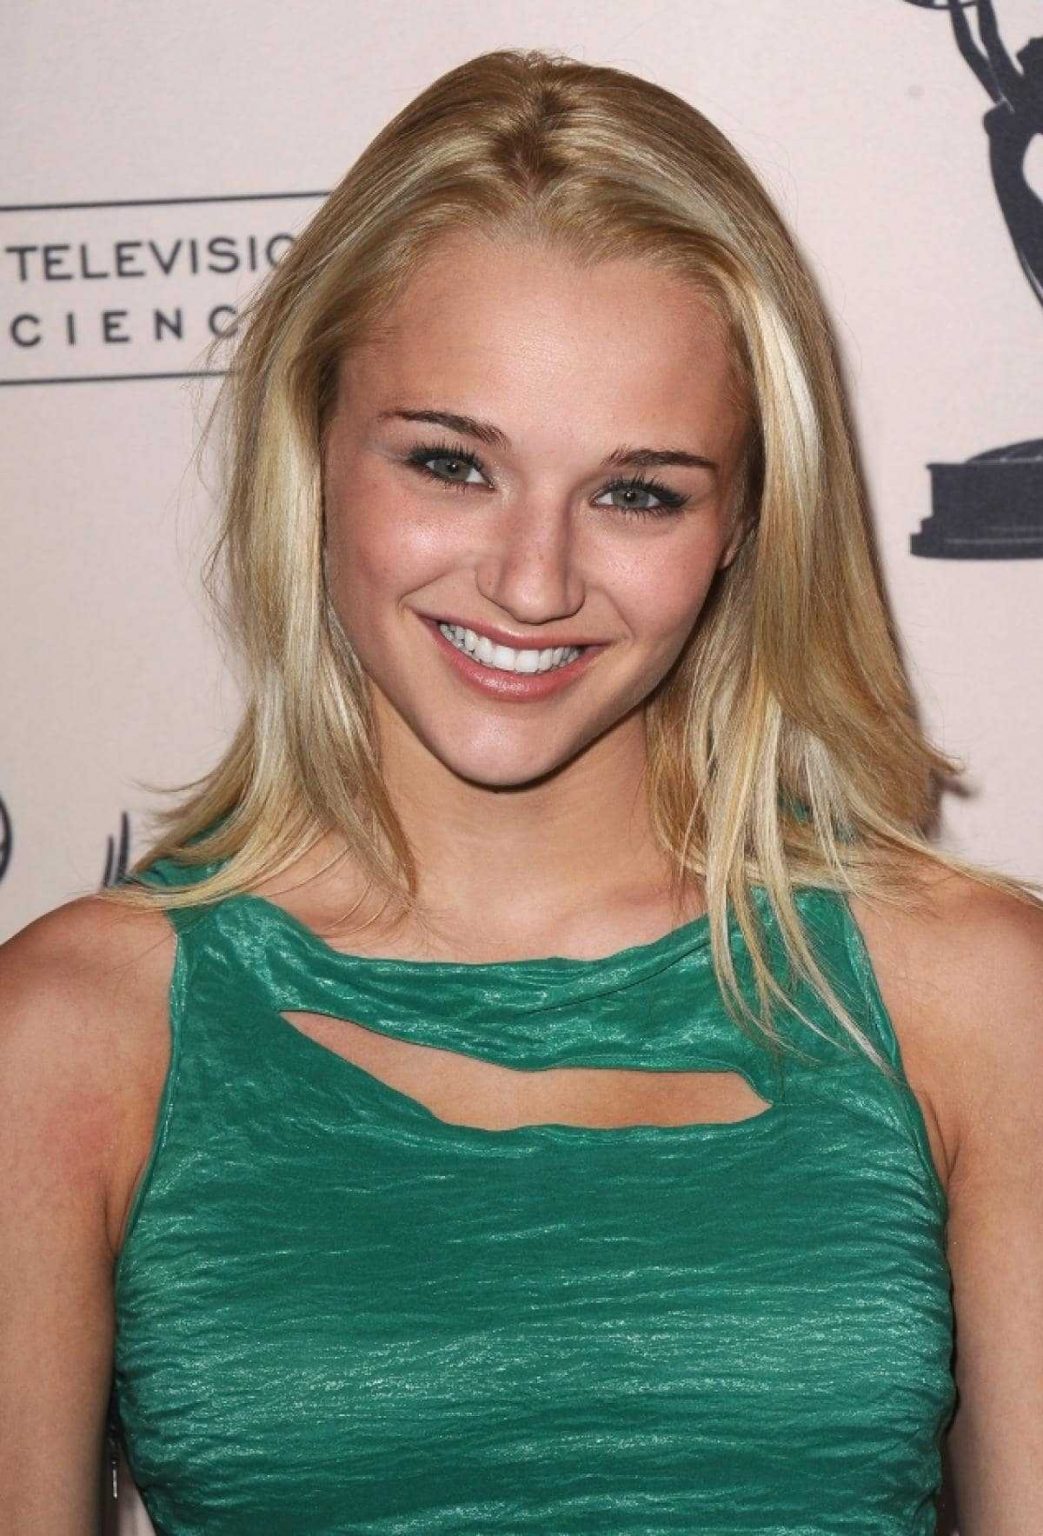 51 Hunter King Nude Pictures Display Her As A Skilled Performer 116